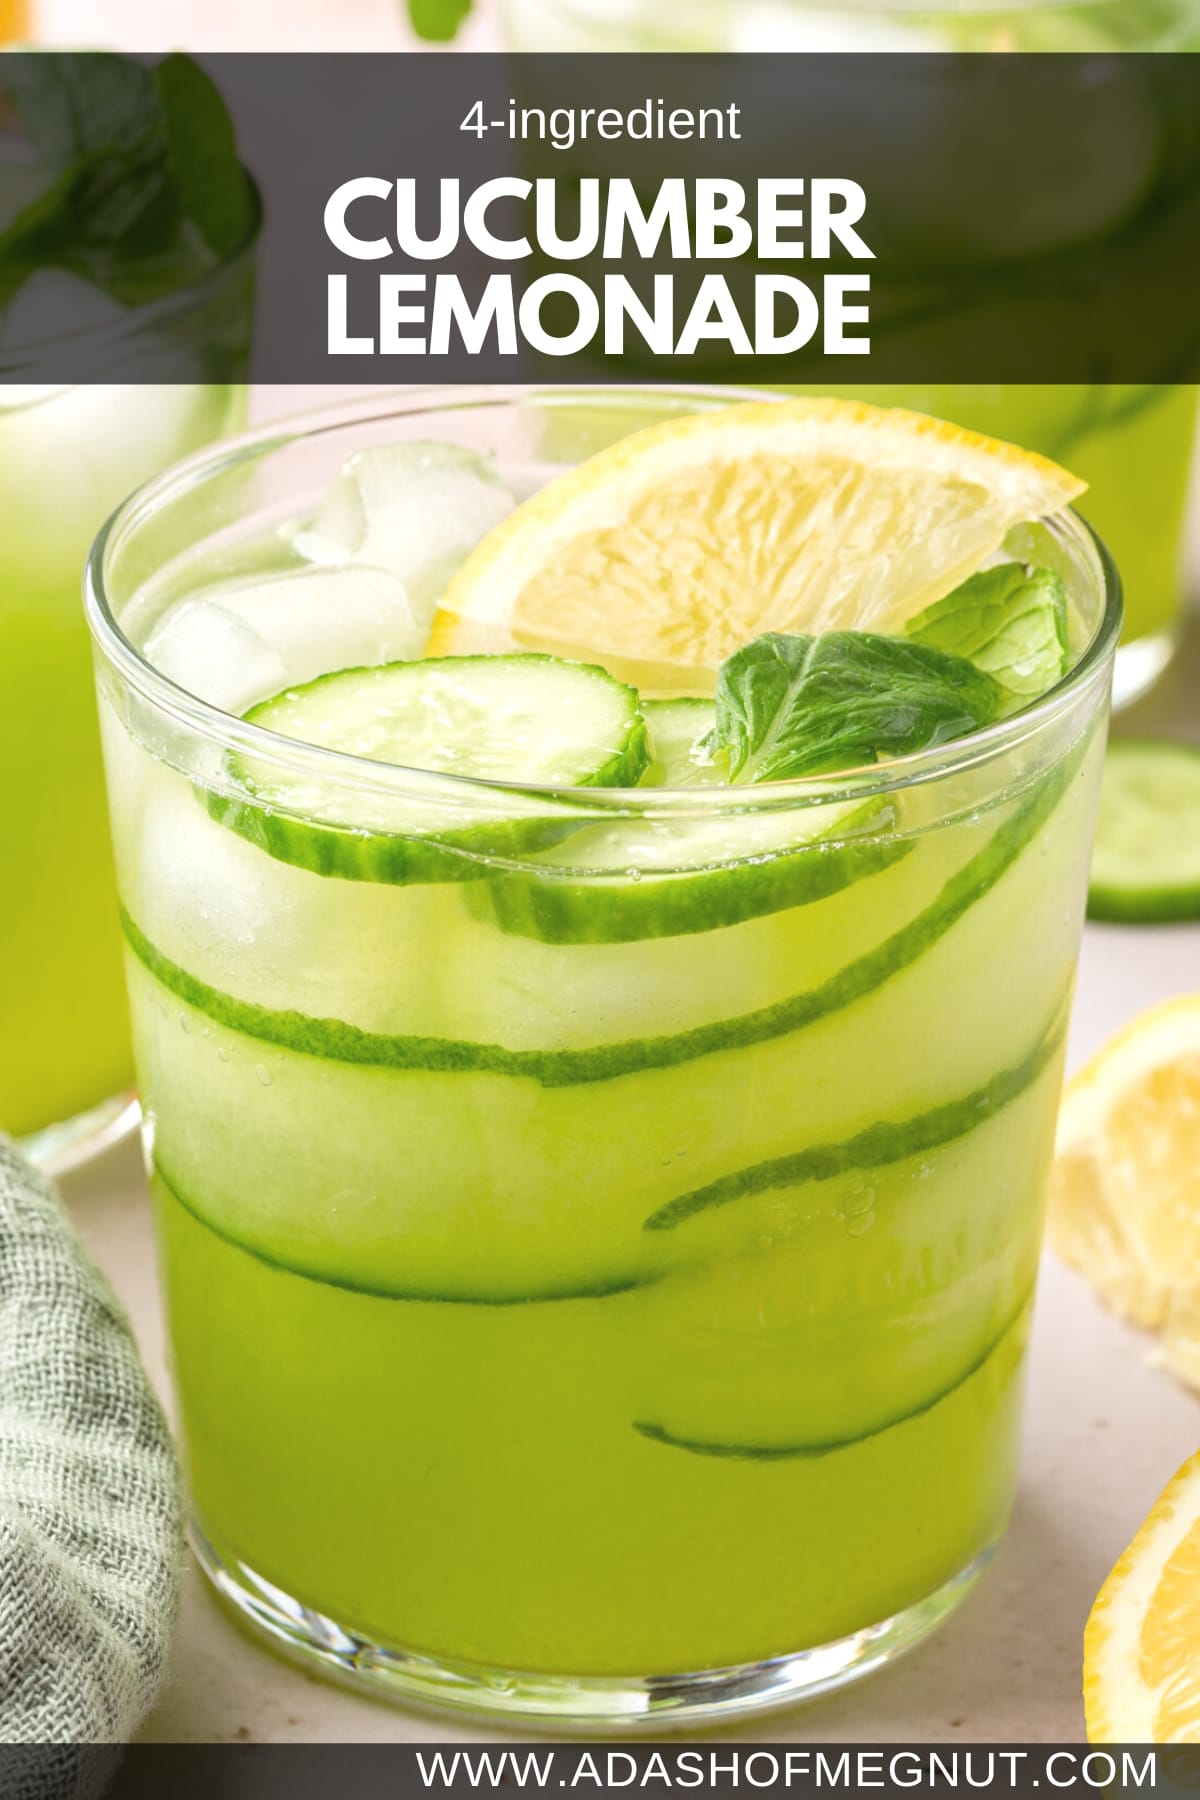 A glass of cucumber lemonade with a wedge of lemon, cucumber slices, cucumber ribbons and fresh mint.